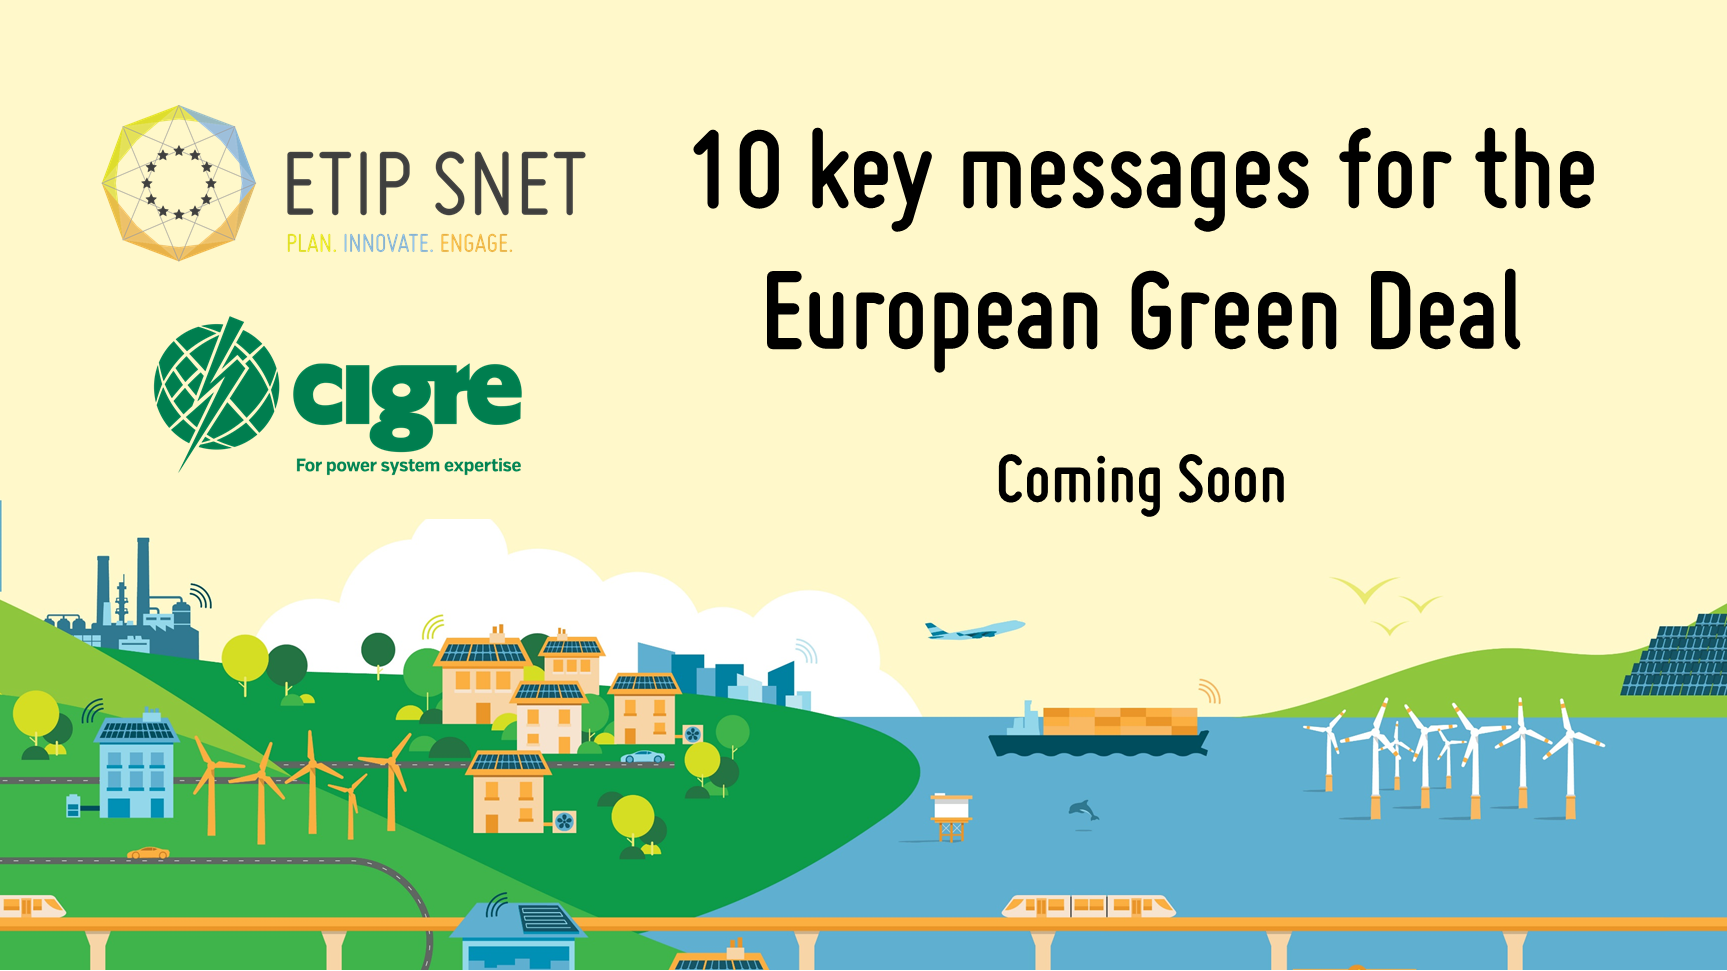 THE EUROPEAN GREEN DEAL STARTS WITH THE ENERGY TRANSITION